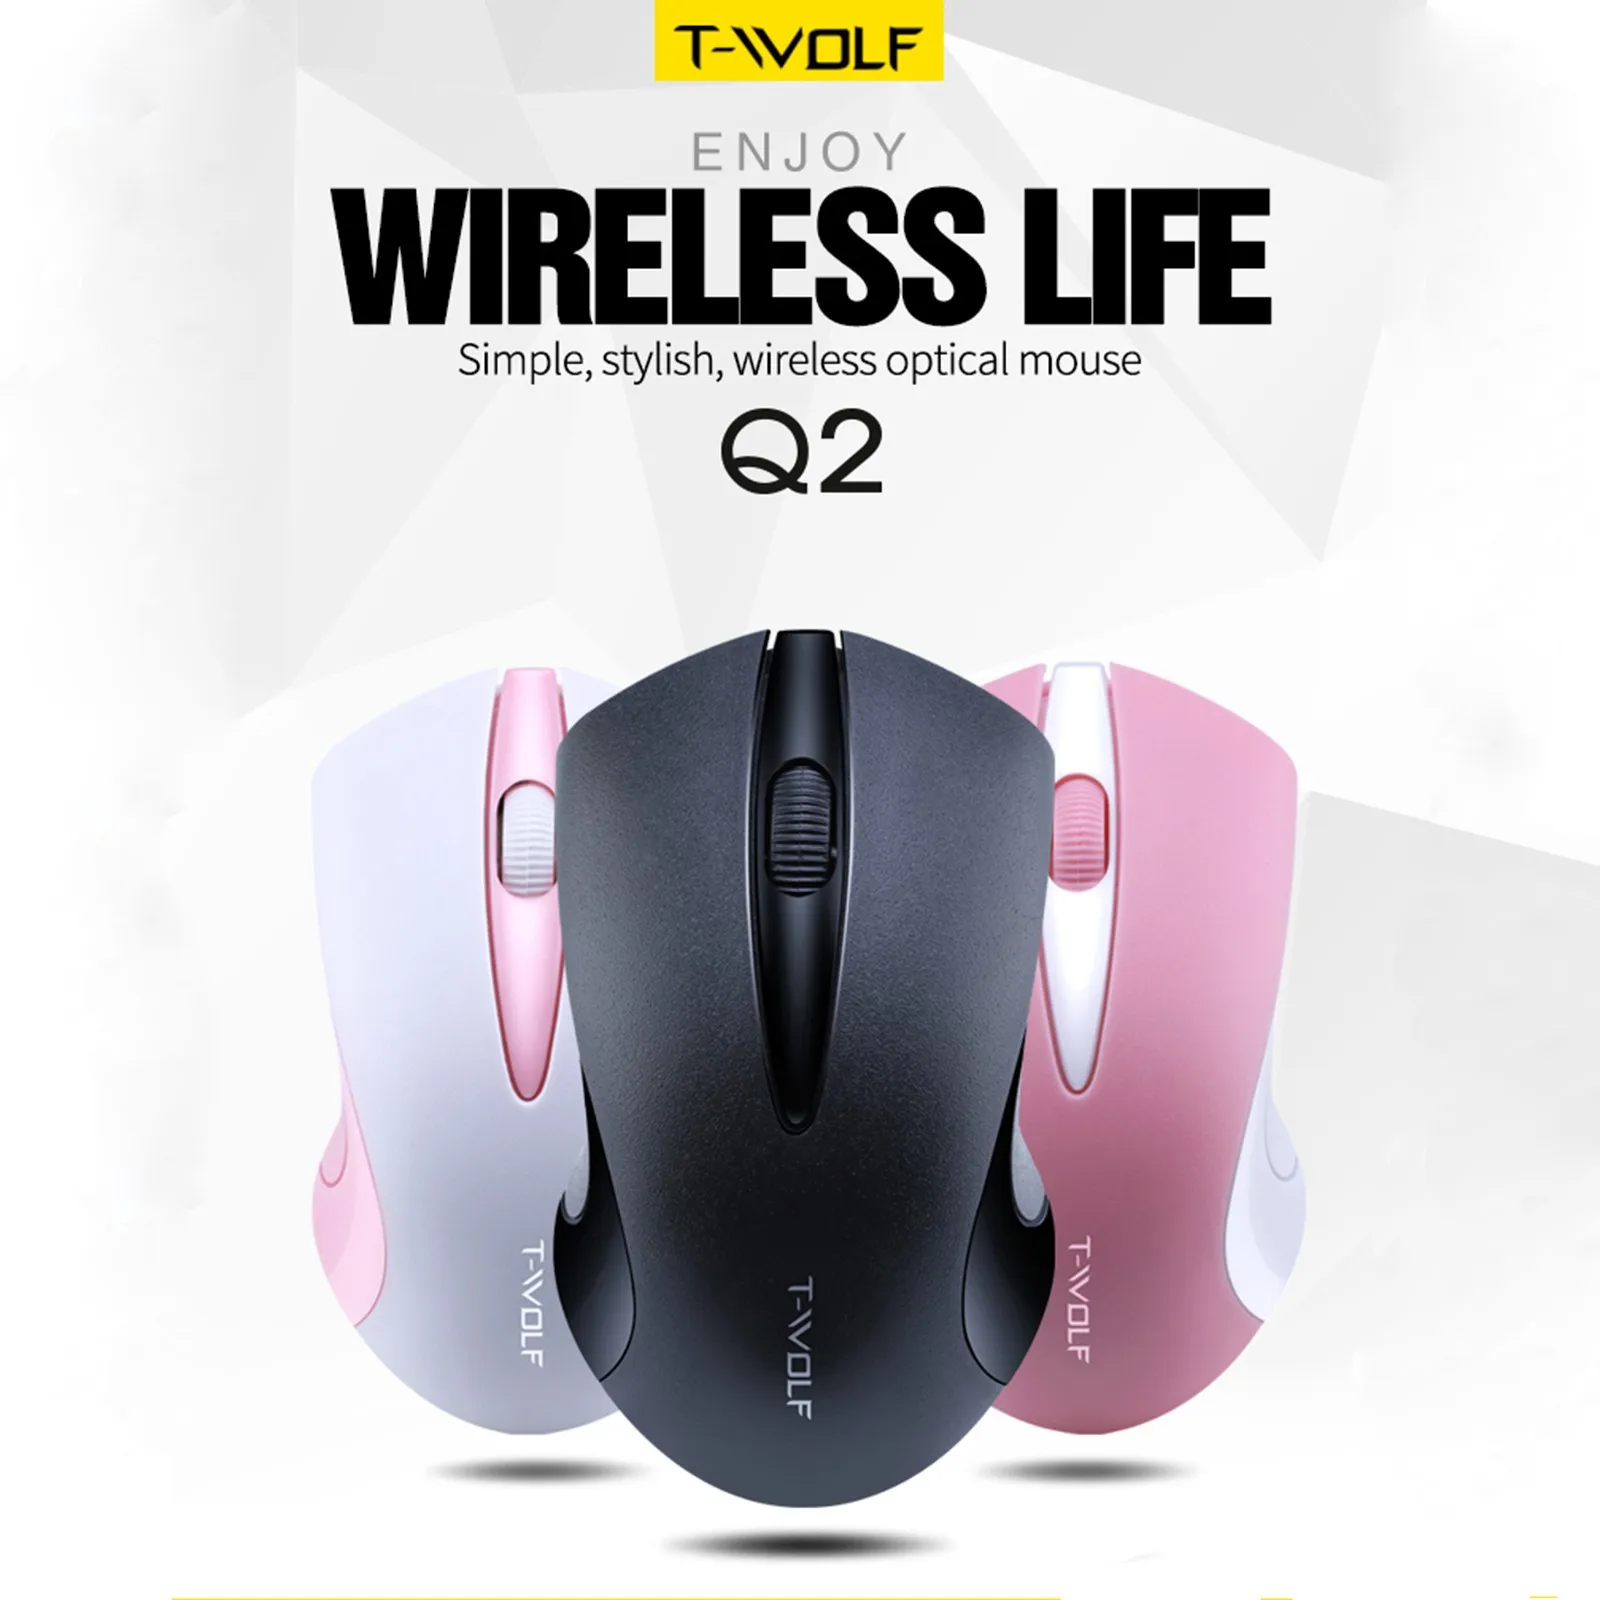 New Wireless Mouse For Notebook Desktop Computer USB Wireless Mouse Business high quality Gaming Mouse